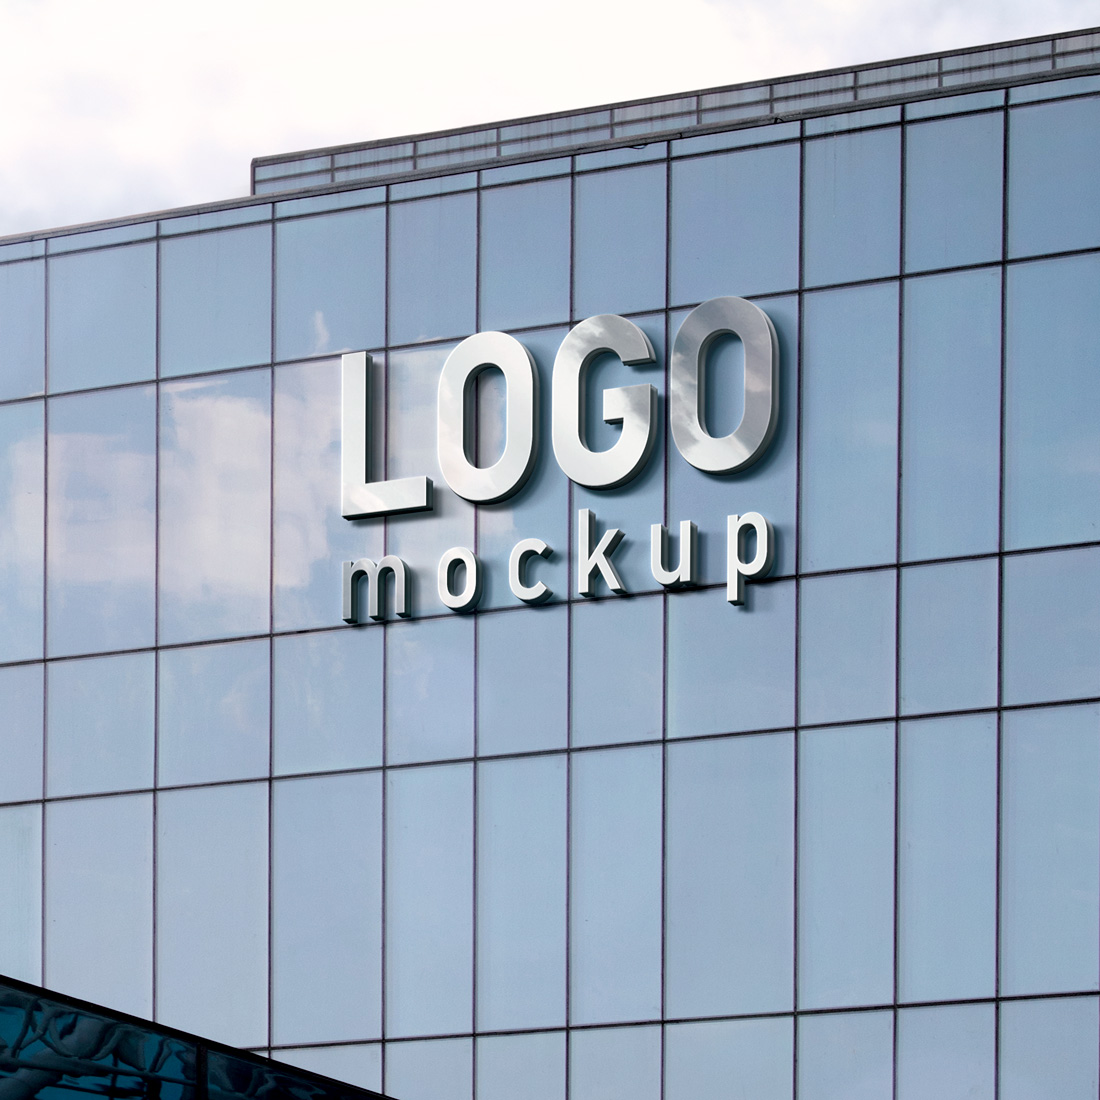 Silver 3d glass building logo Mockup PSD preview image.